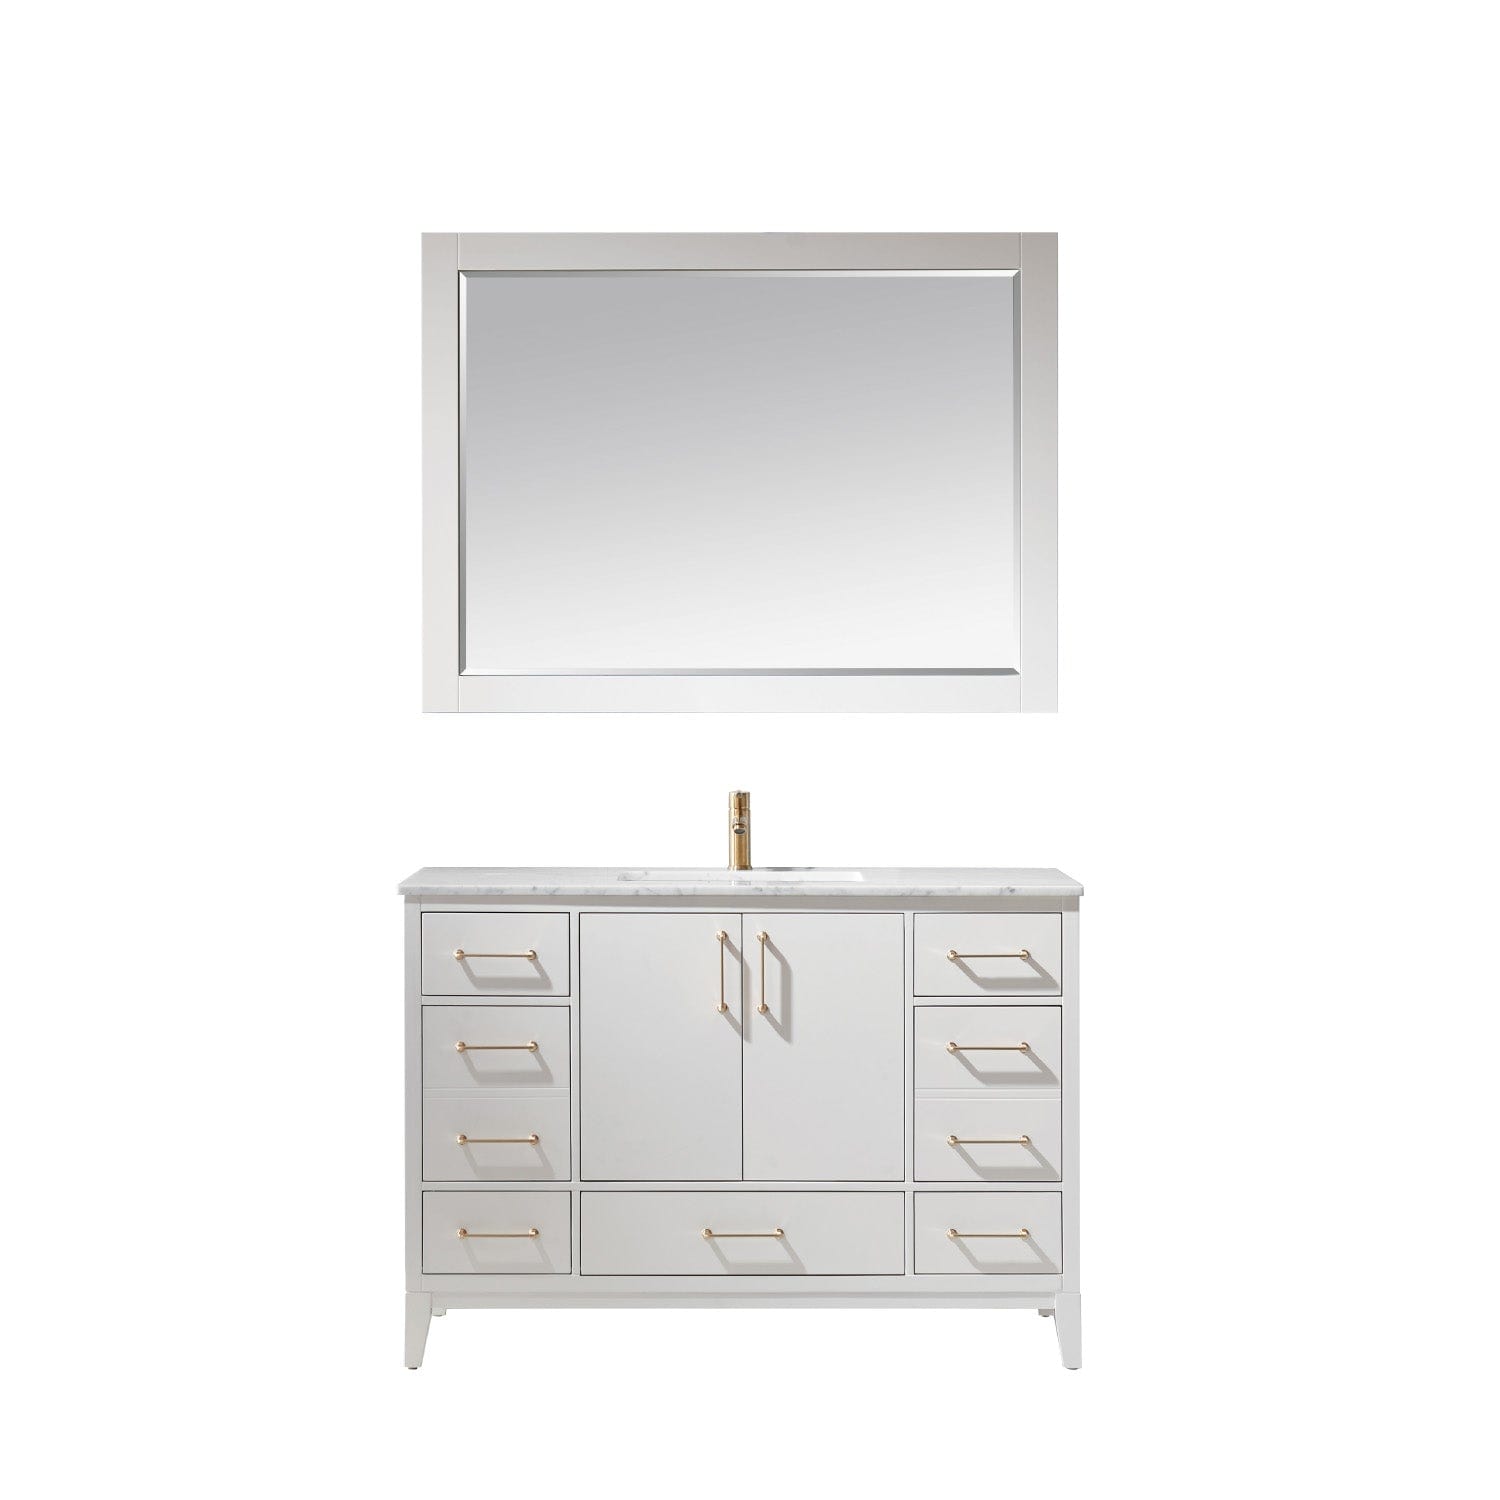 Altair Sutton 48" Single Bathroom Vanity Set in White and Carrara White Marble Countertop with Mirror 541048-WH-CA - Molaix631112971911Vanity541048-WH-CA